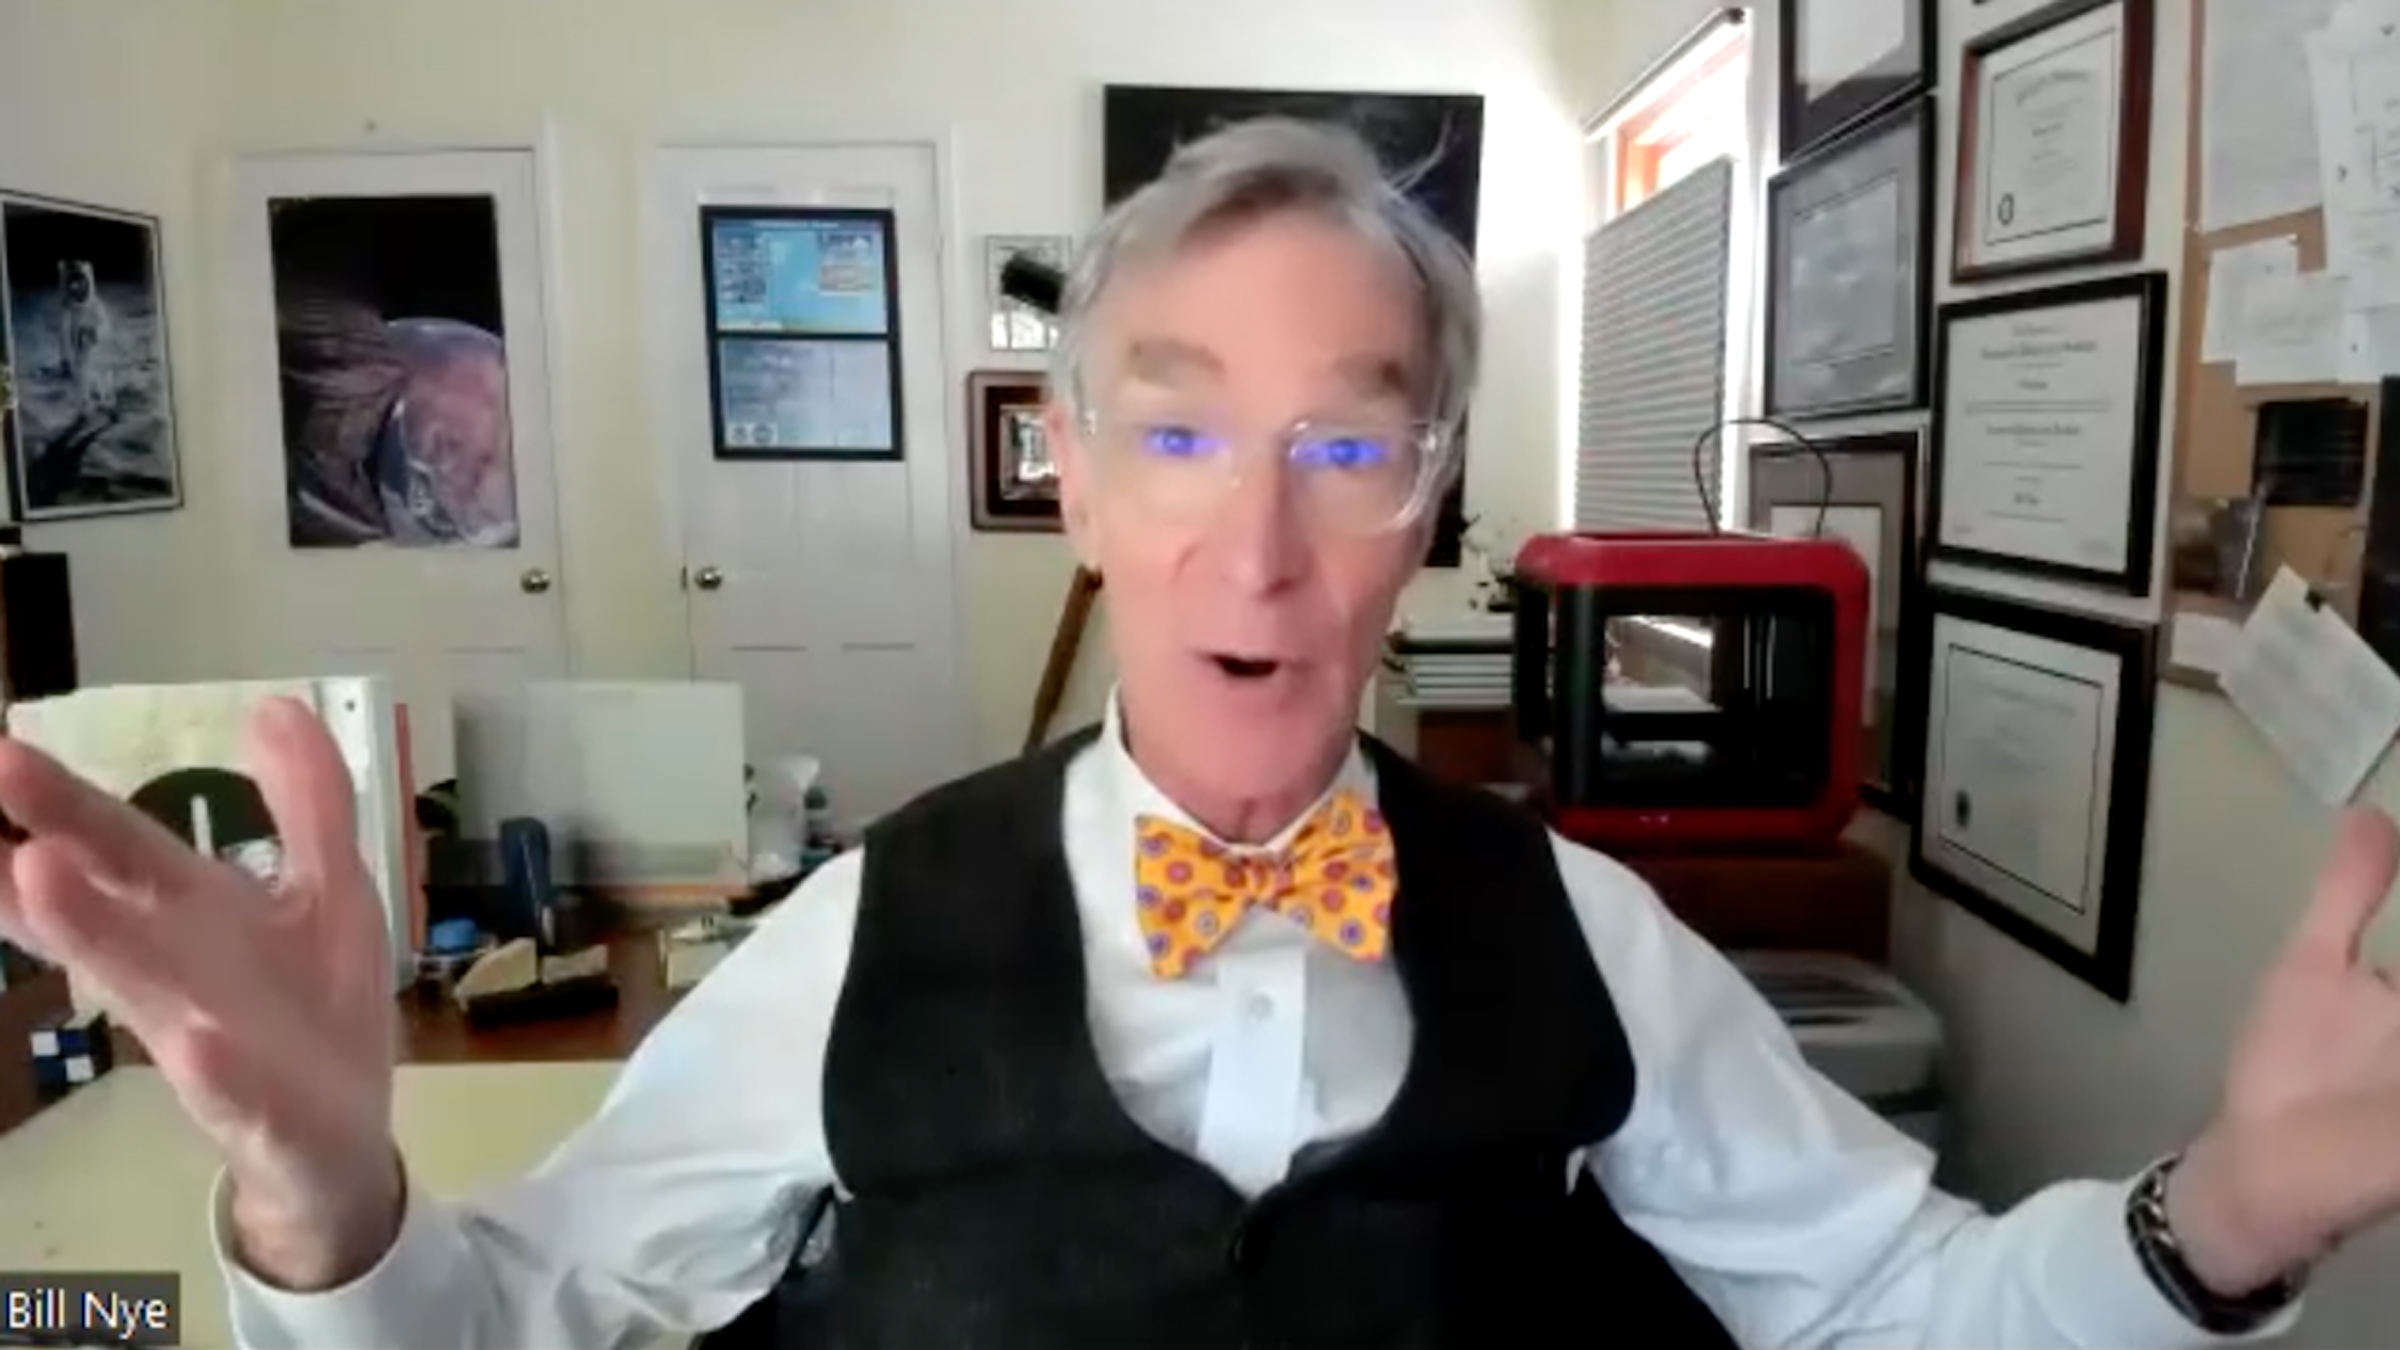 Costs Nye the Science Guy, using a yellow bow tie, white t-shirt and vest, gestures while being in his workplace.